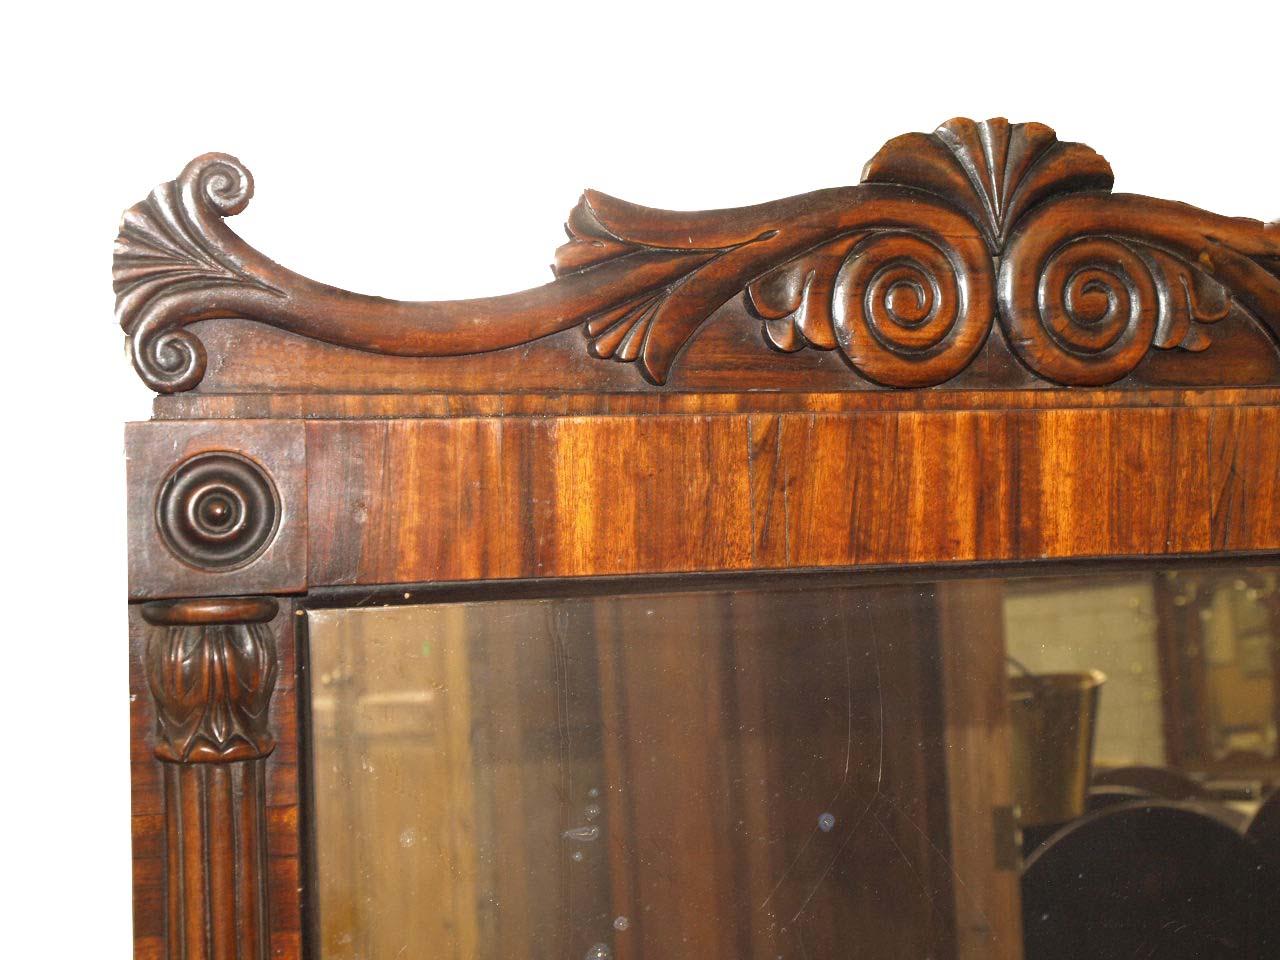 William IV rosewood mirror, with nicely carved and shaped cornice, the original mirror glass surrounded by rosewood veneer, the sides with fluted pilasters have carved capitals and bases, the bottom of the mirror steps out.